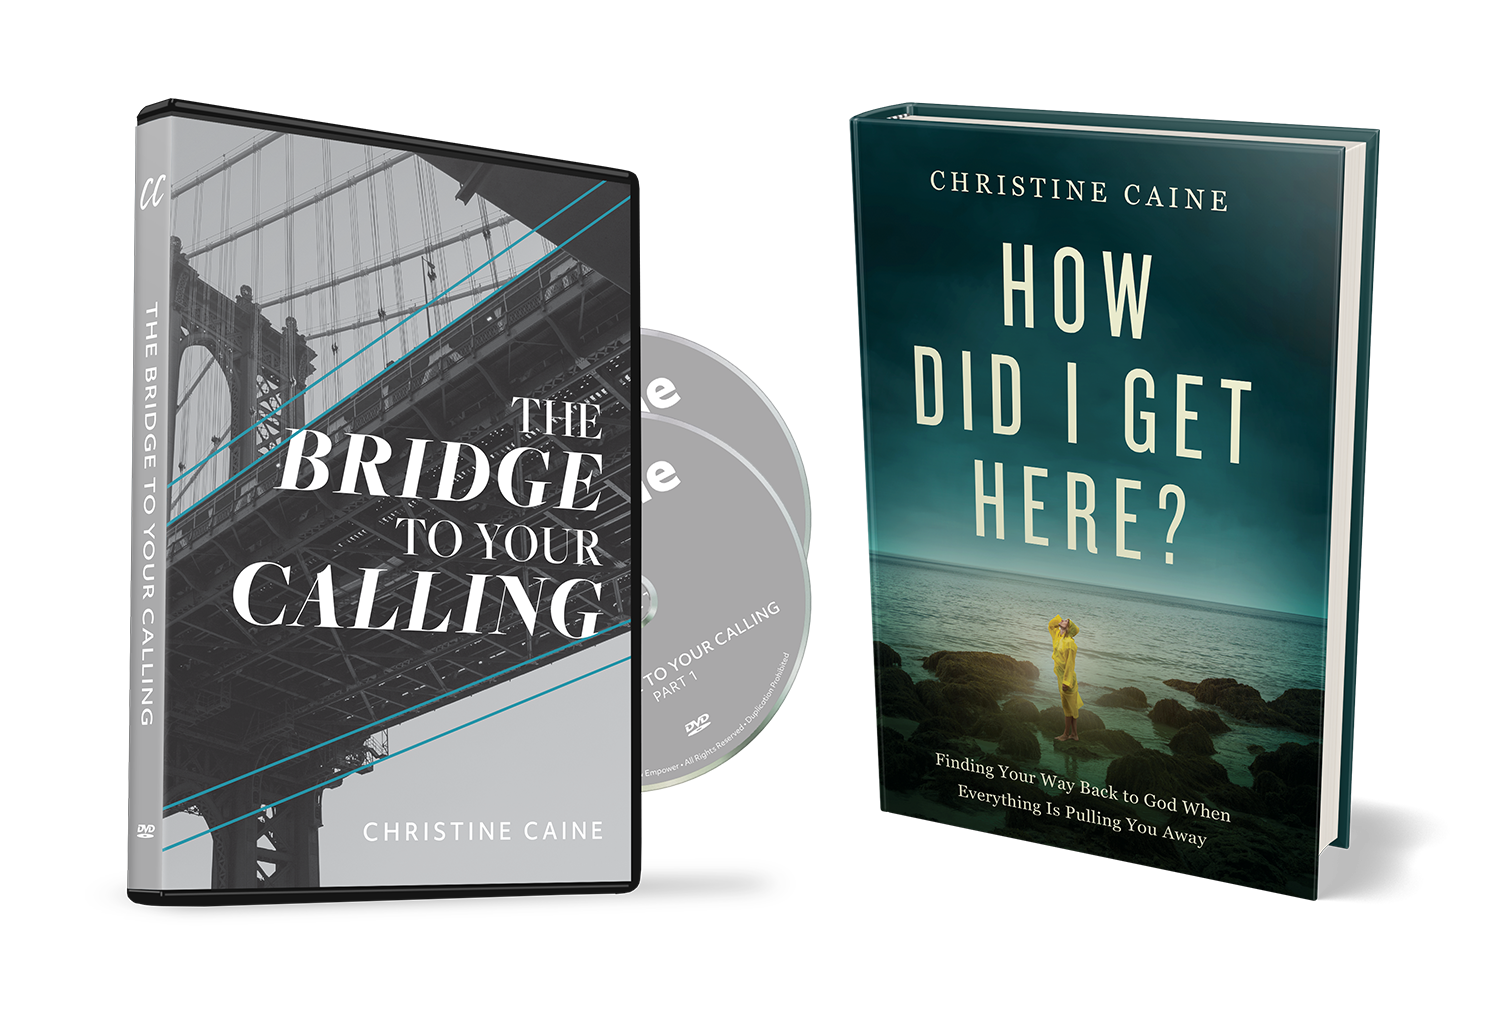 The Bridge to Your Calling and How Did I Get Here? books by Christine Caine on TBN